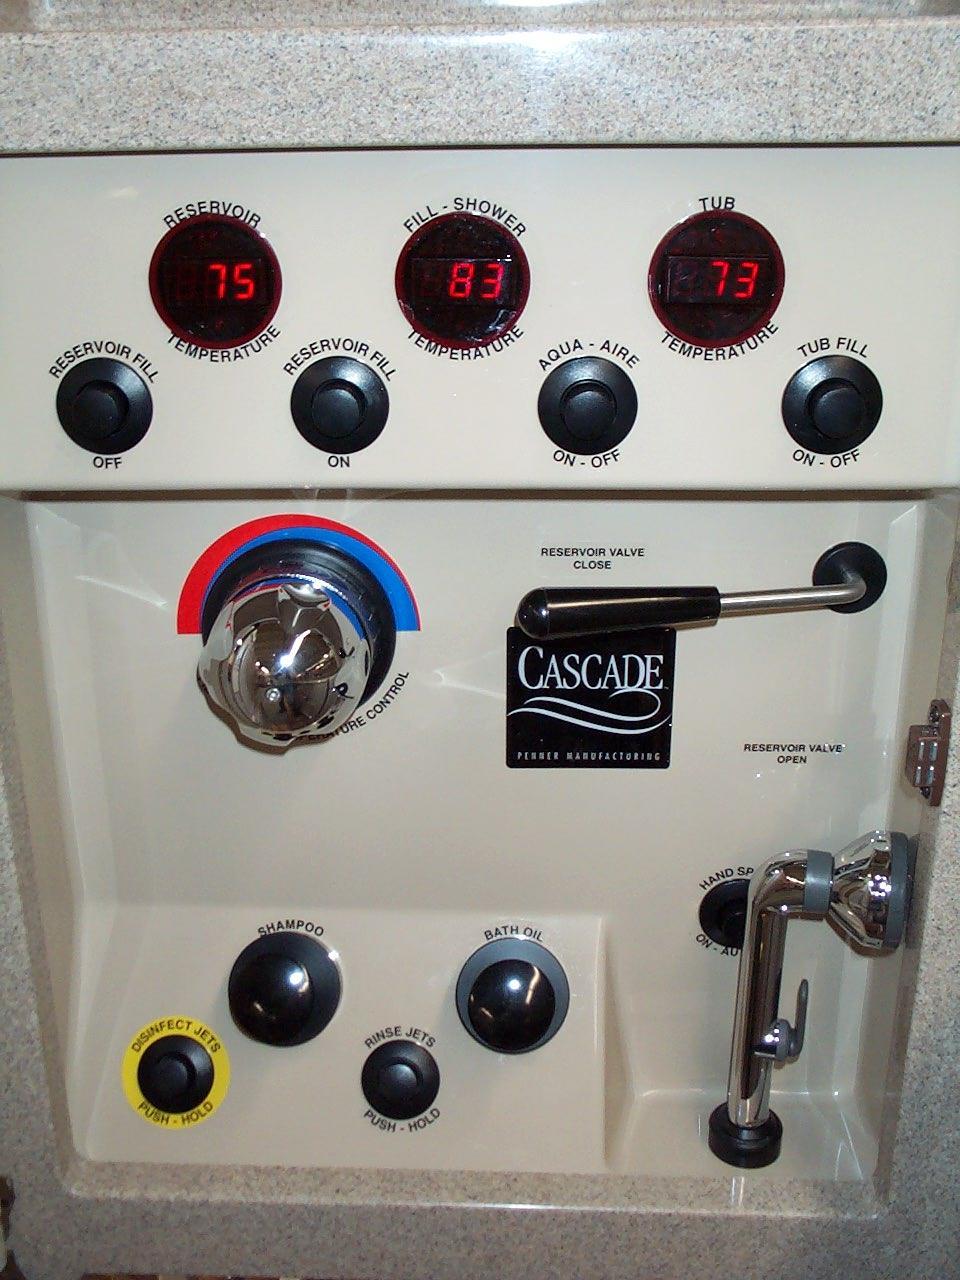 System Controls: Cascade Standard Premier TUB TEMPERATURE READ-OUT FILL-SHOWER TEMPERATURE READ-OUT RESERVOR TEMPERATURE READ-OUT RESERVOIR FILL OFF RESERVOIR FILL ON AQUA-AIRE ON/OFF BUTTON TUB FILL